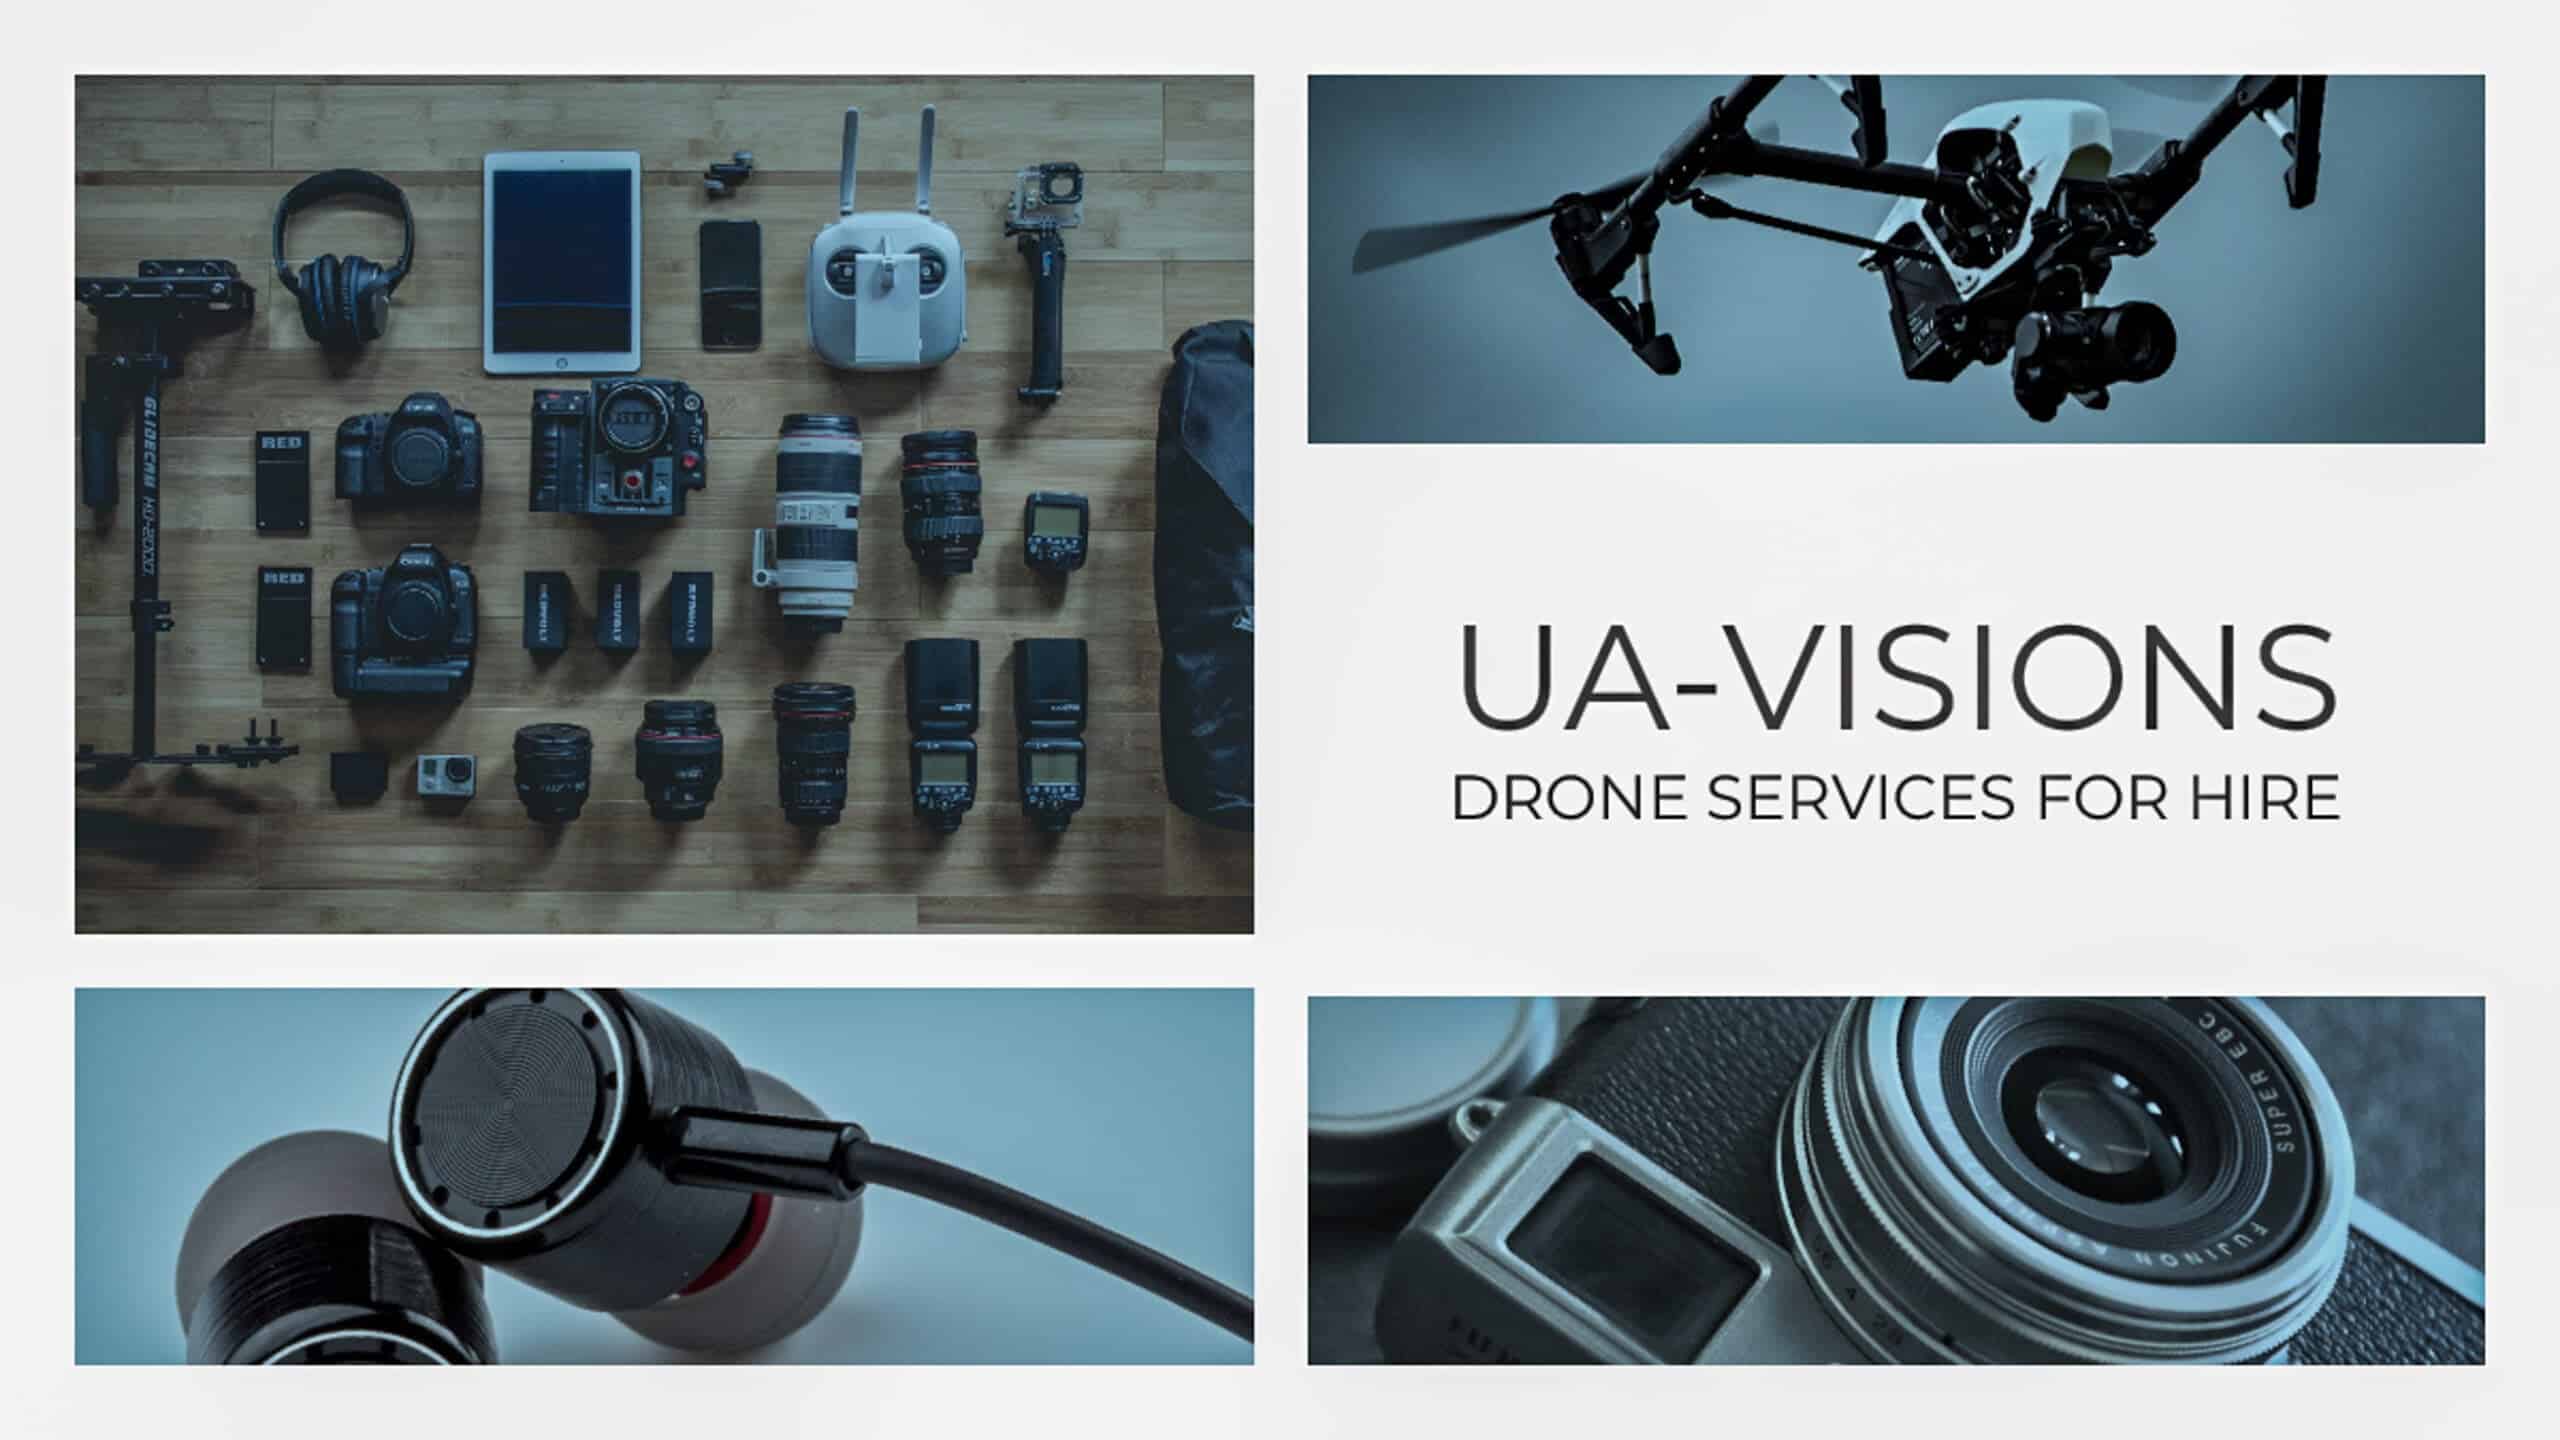 Portfolio Banner showcasing 'UA Visions: Drone Services for Hire' with a professional setup including an iPad and camera equipment.